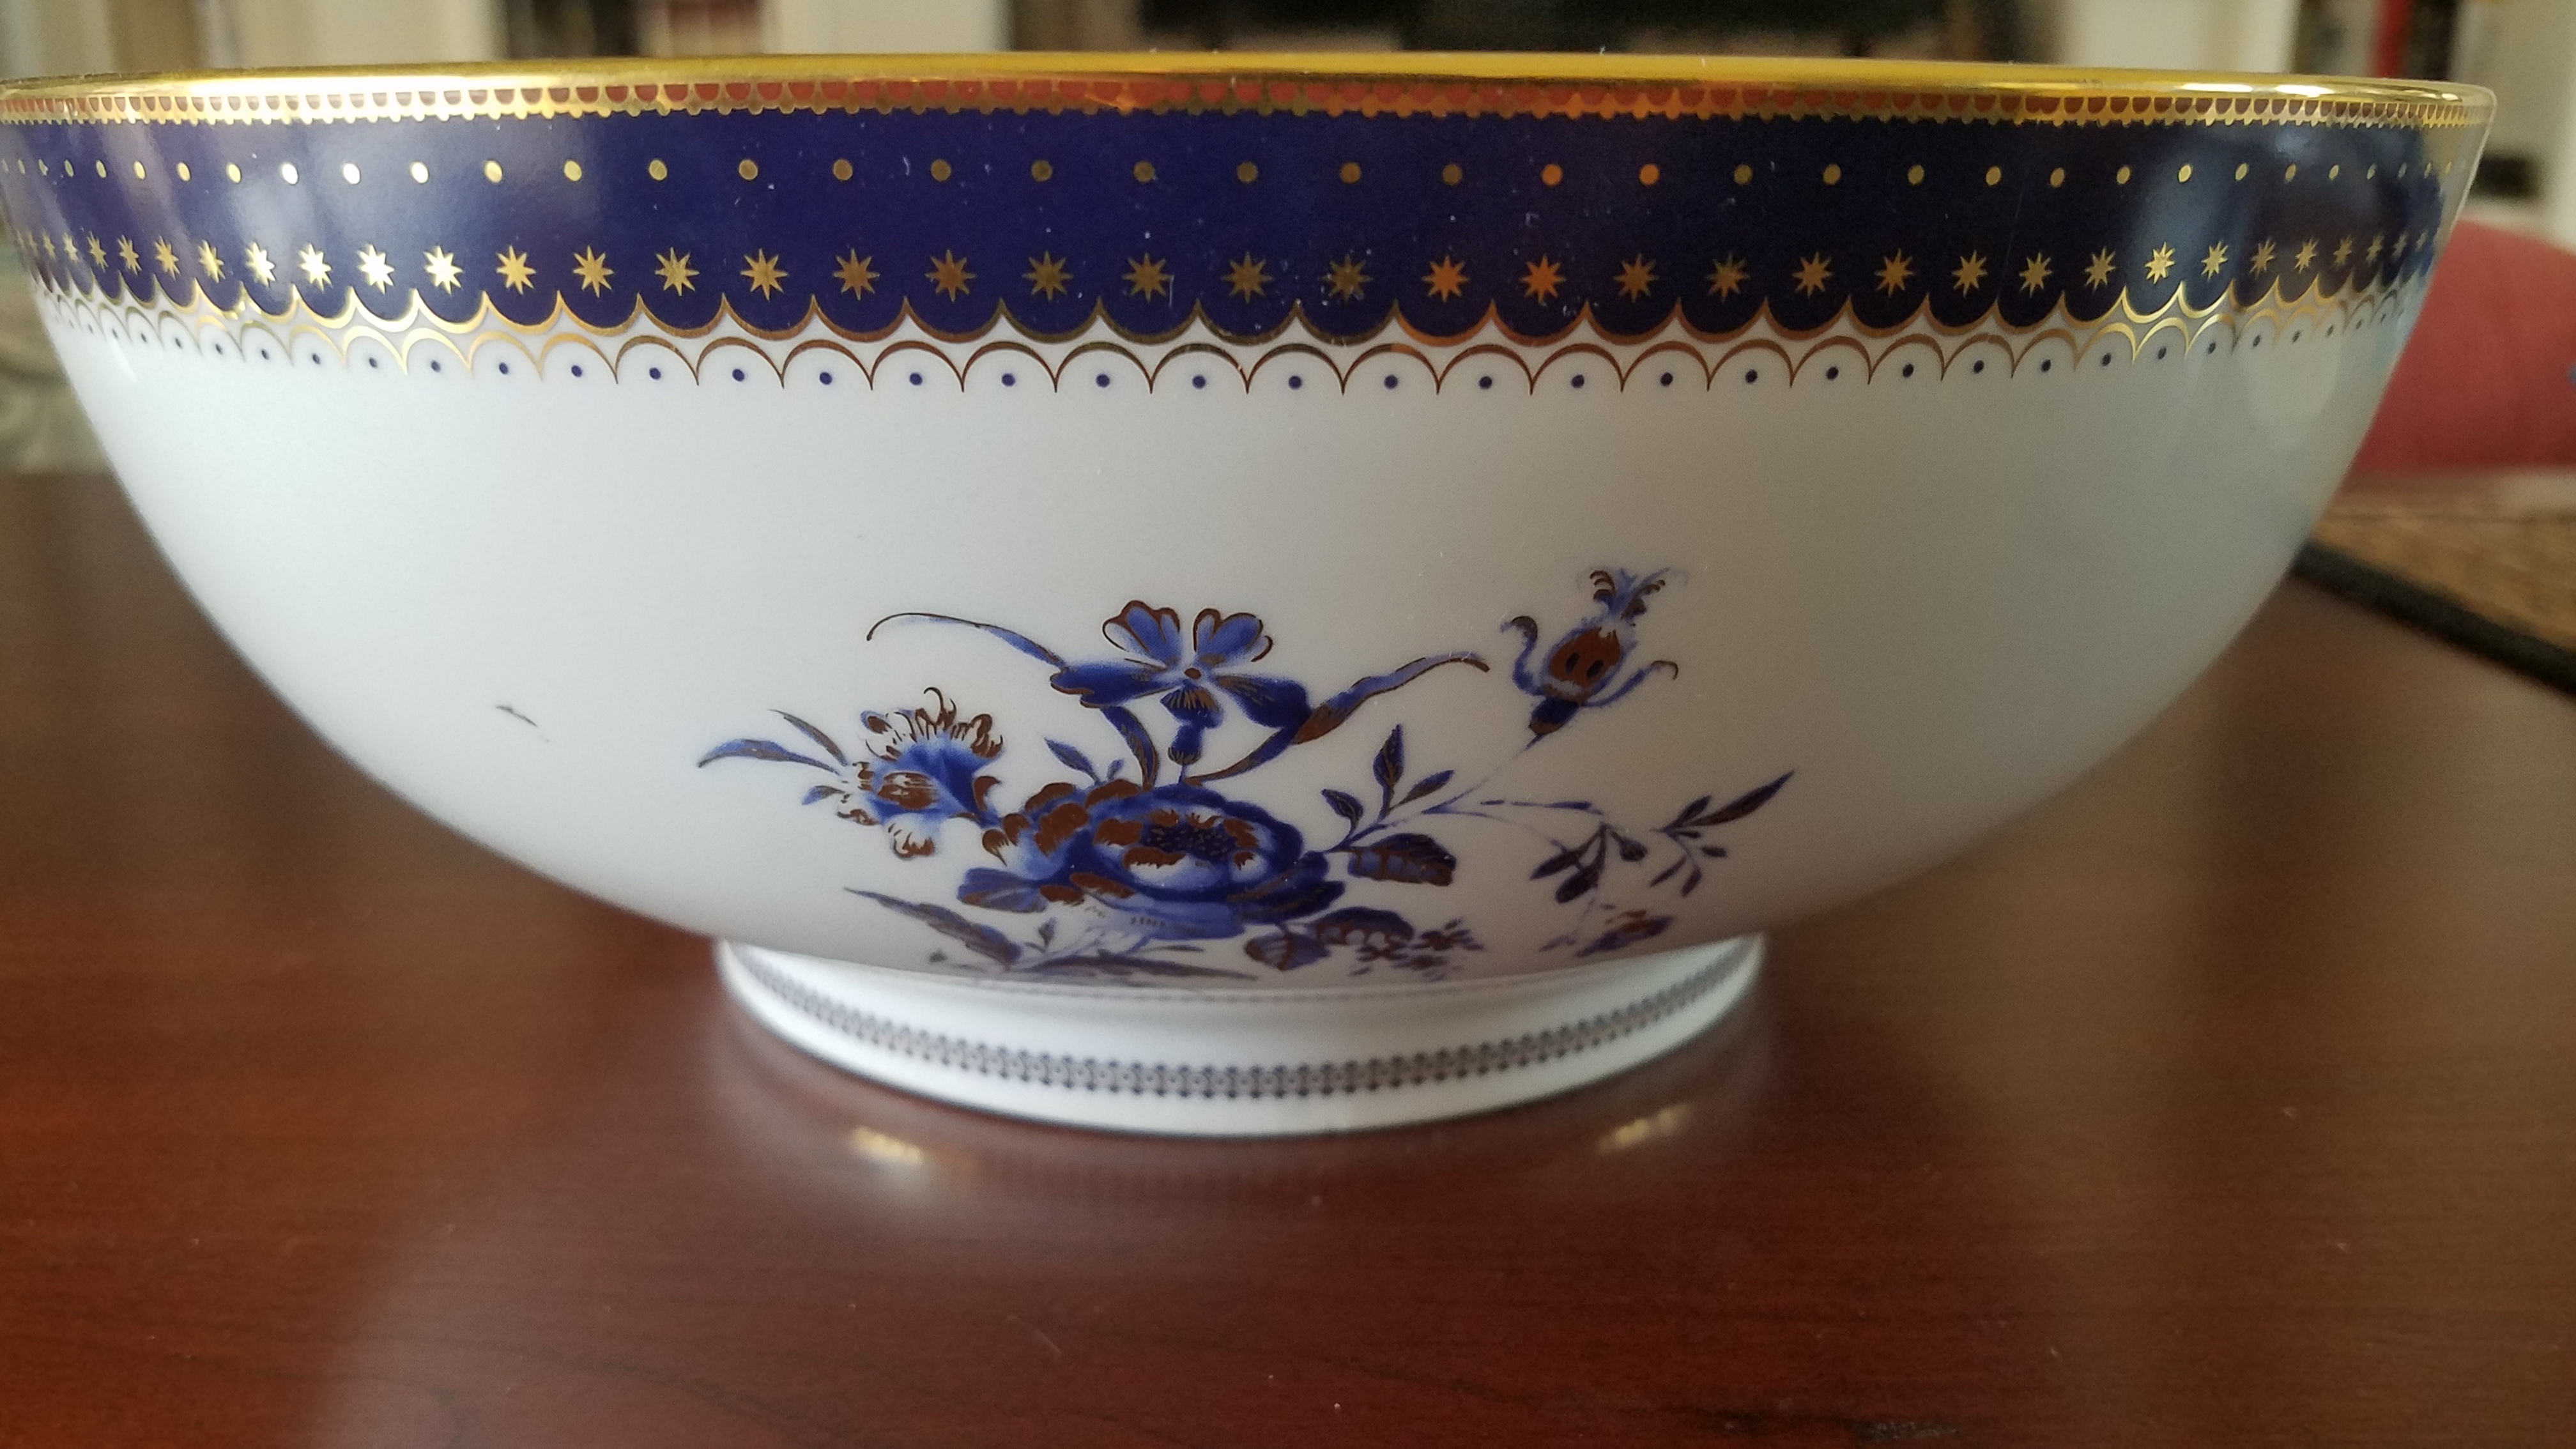 The Truxtun Bowl – Guest post by Judith Pearson